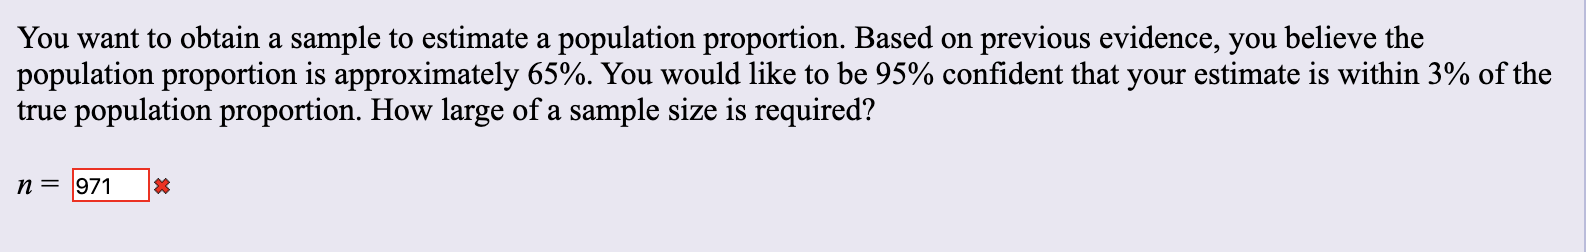 You want to obtain a sample to estimate a population proportion. Based on previous evidence, you believe the
population proportion is approximately 65%. You would like to be 95% confident that your estimate is within 3% of the
true population proportion. How large of a sample size is required?
п 3 971
